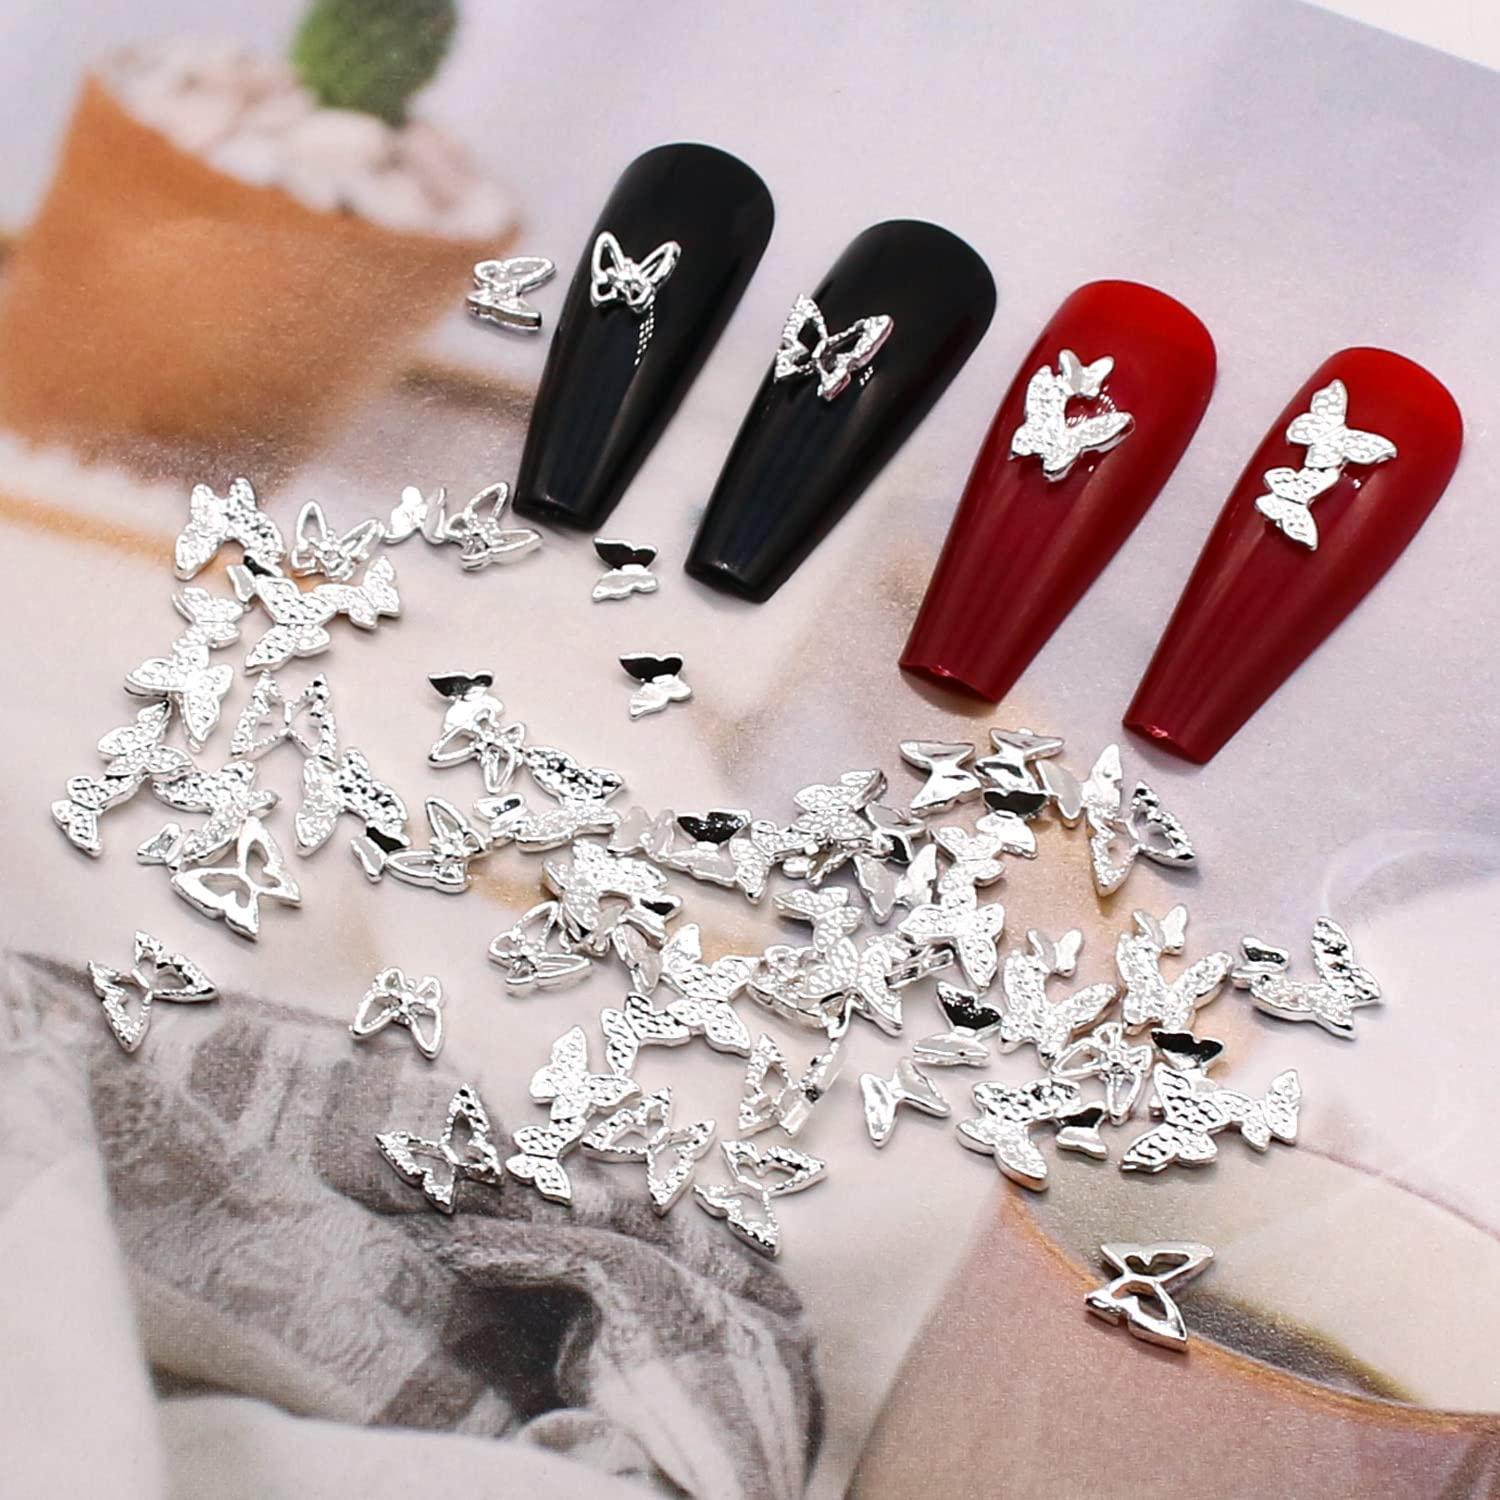  WOKOTO 20 Pcs Dangle Nail Charms for Women Nail Art Jewelrys  Mix Designs Heart Butterfly Flower Gold and Silver Nail Charms for Acrylic  Nails Jewels Luxury Nail Rhinestones Decorations for Nails 